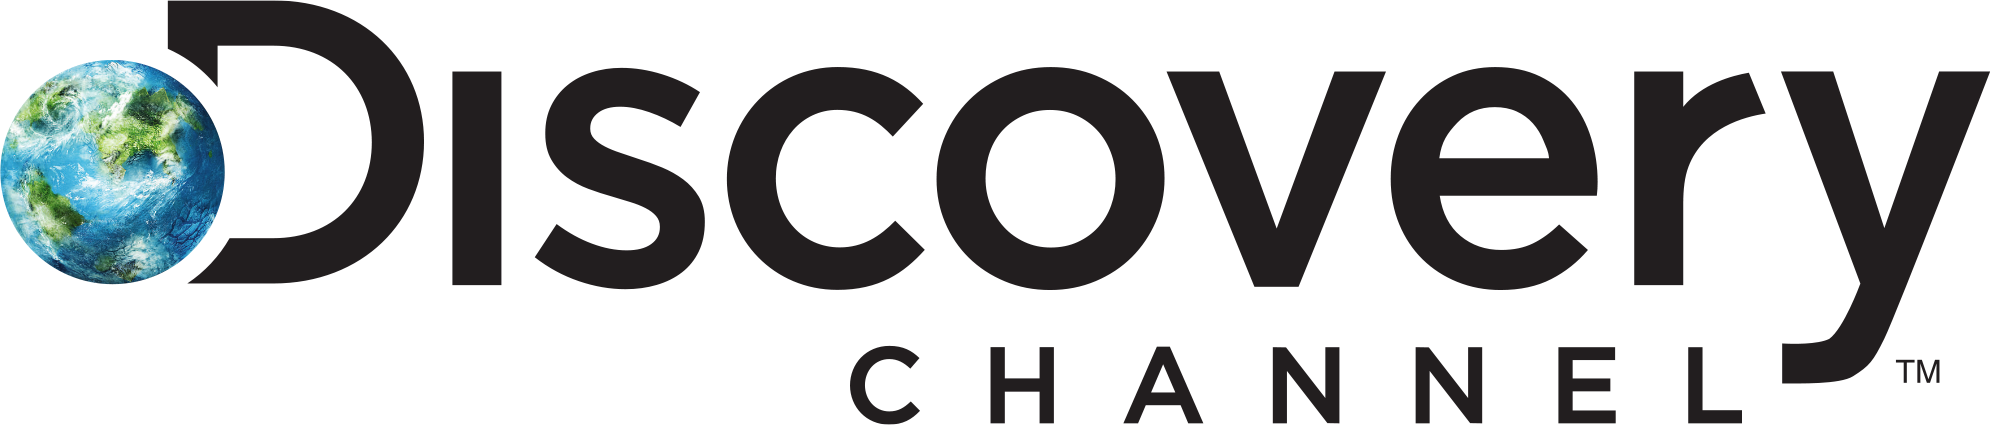 Discovery-Channel-logo